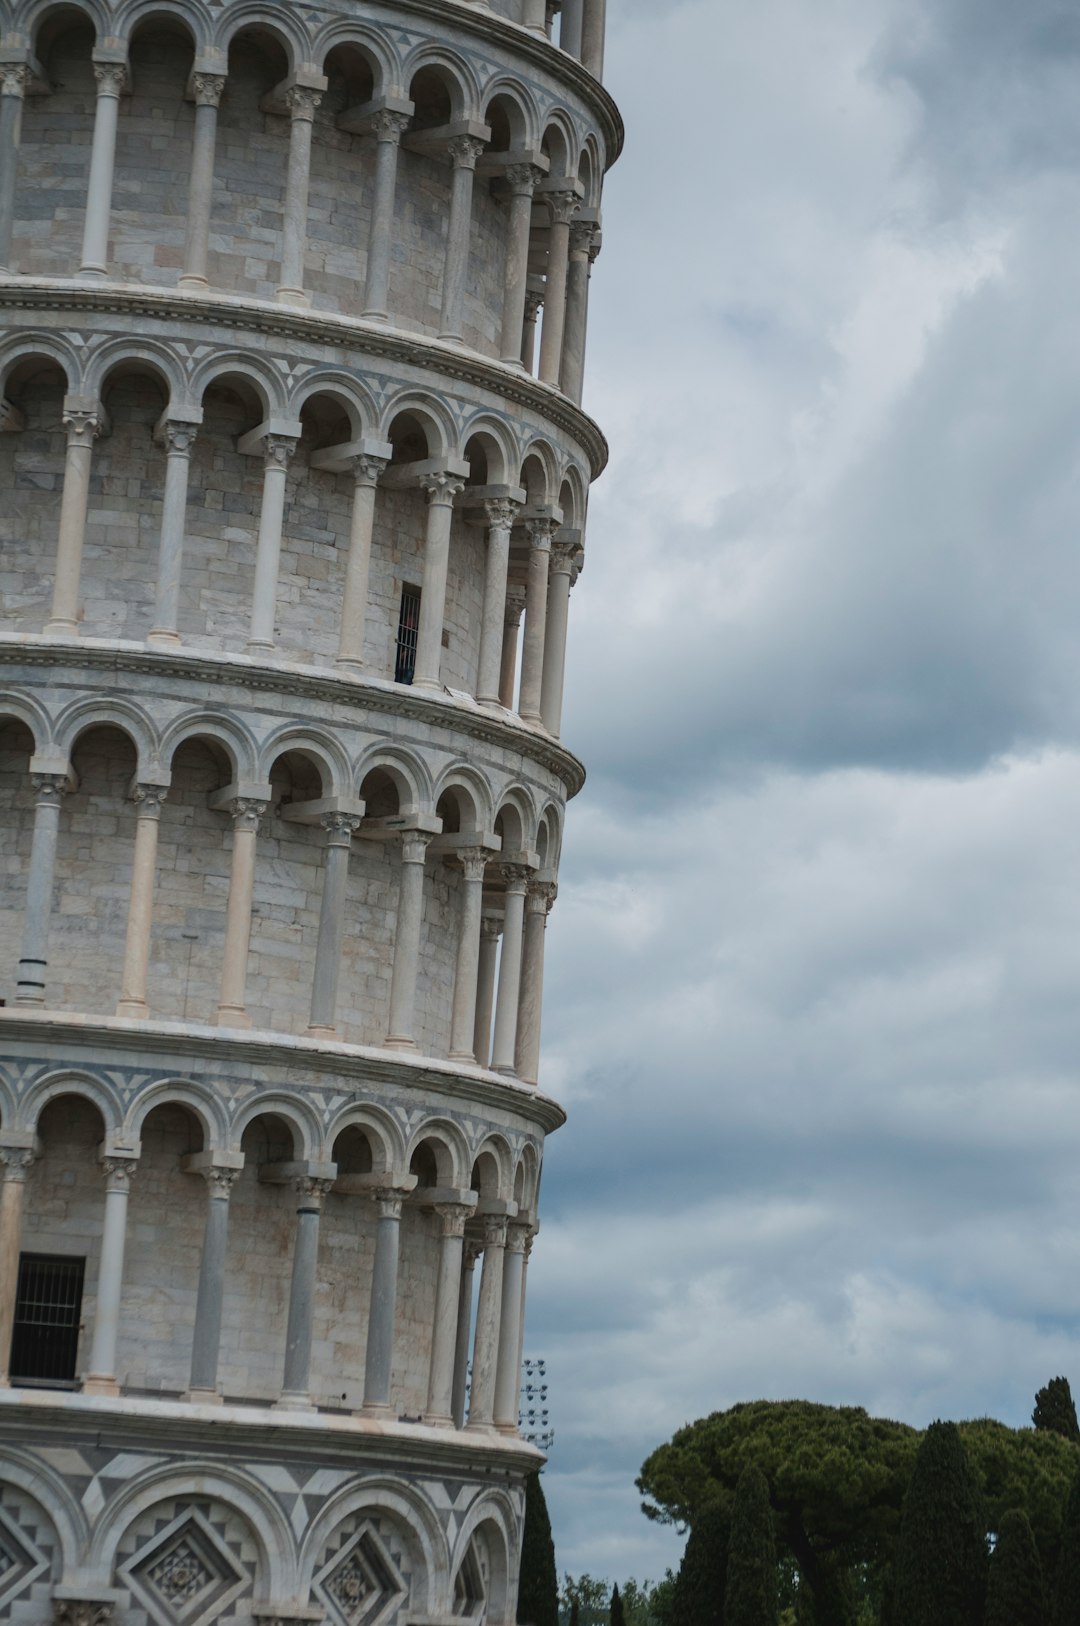 The Leaning Tower of Pisa during daytime